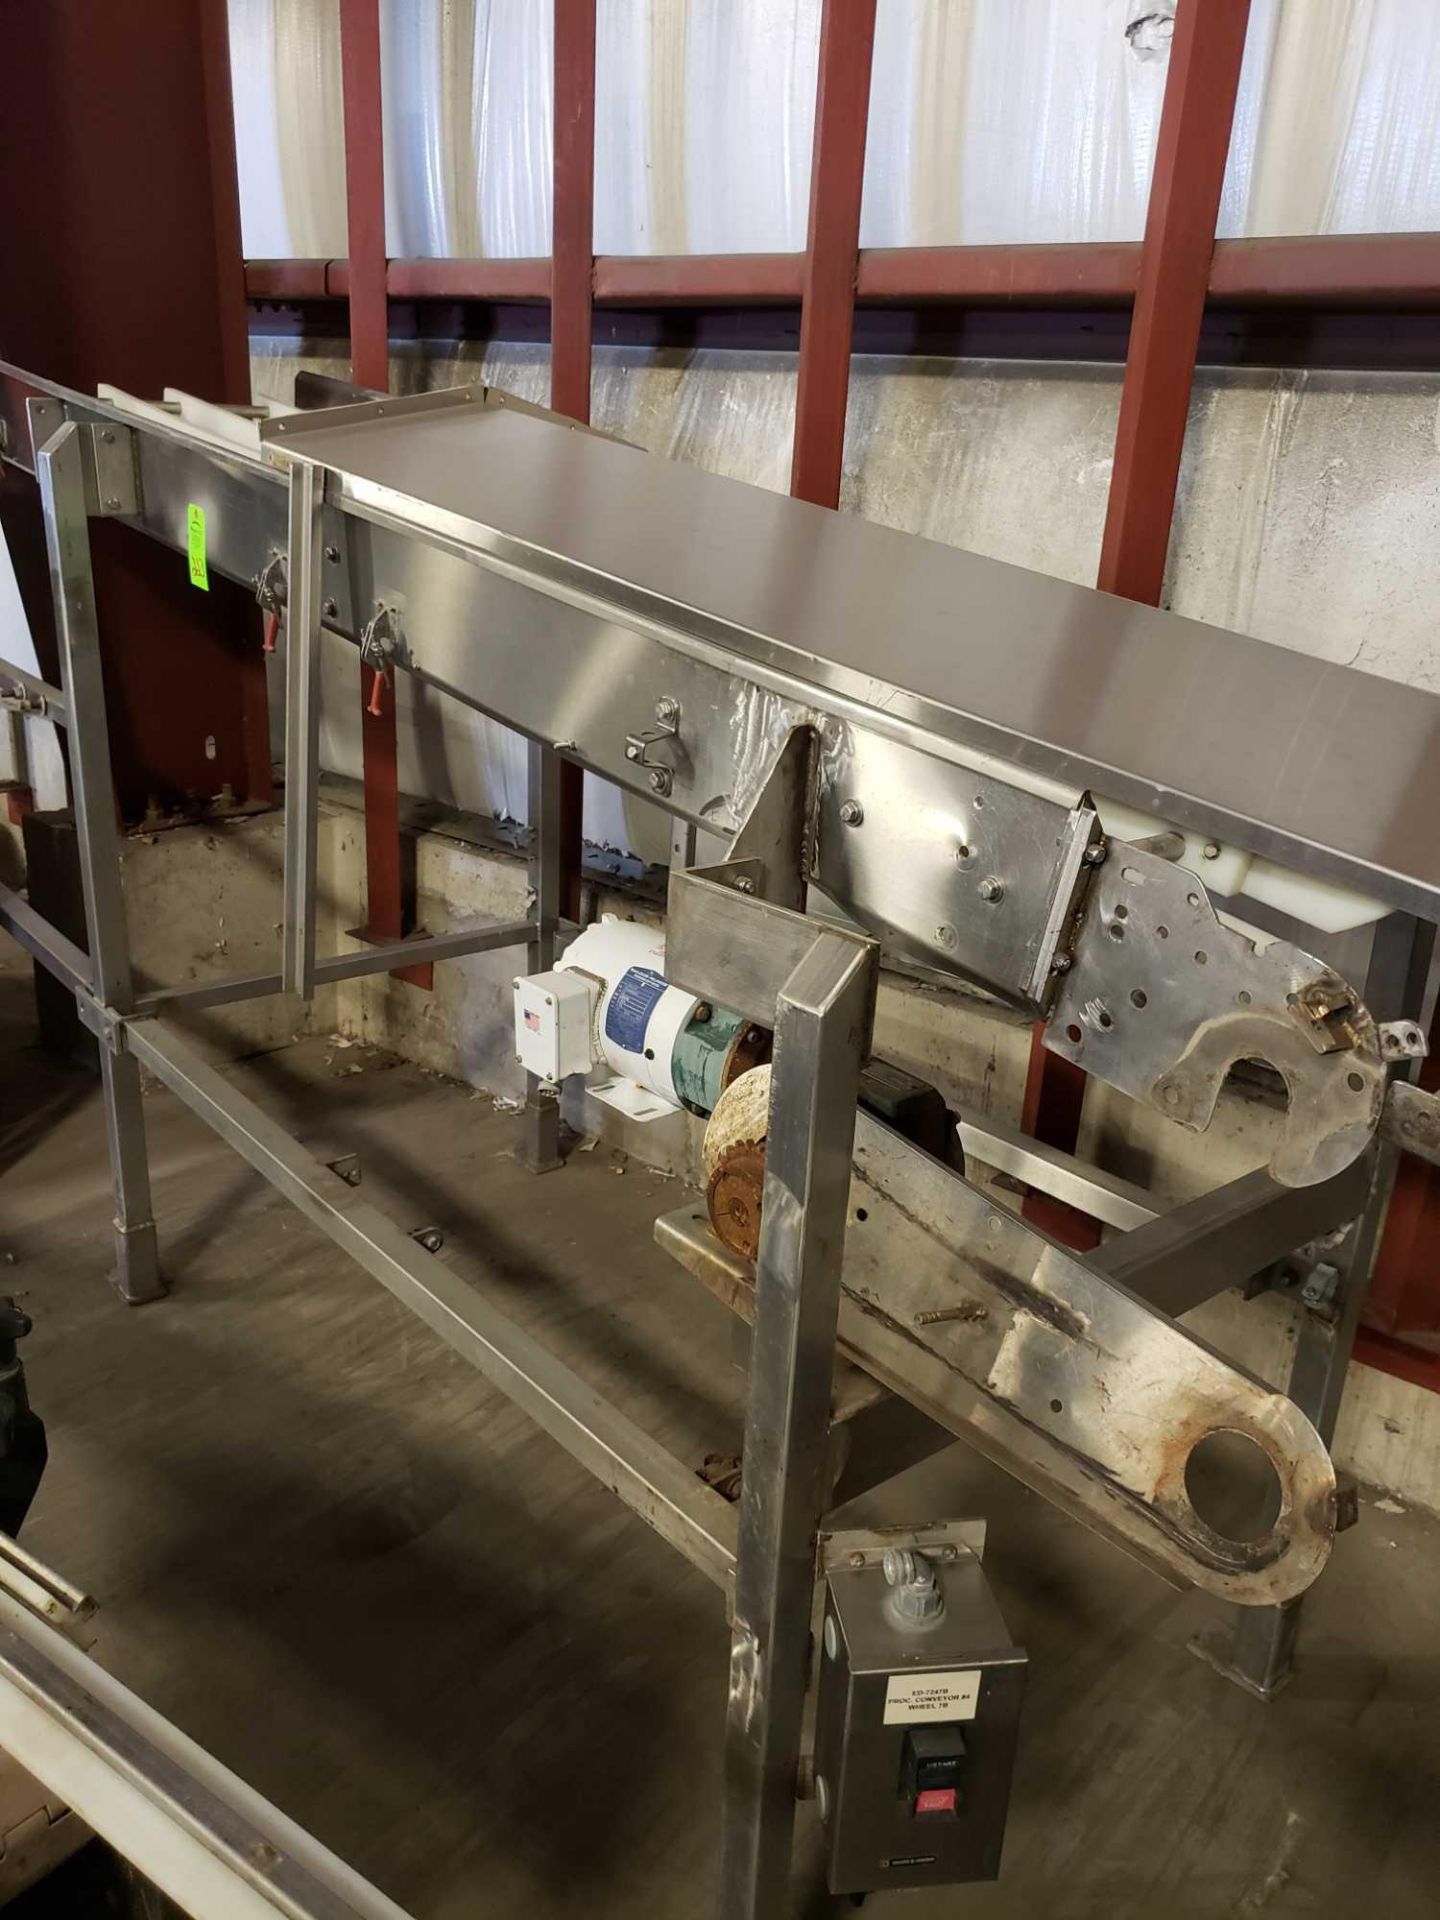 Stainless steel conveyor approx 10' long x 30" wide. - Image 2 of 6